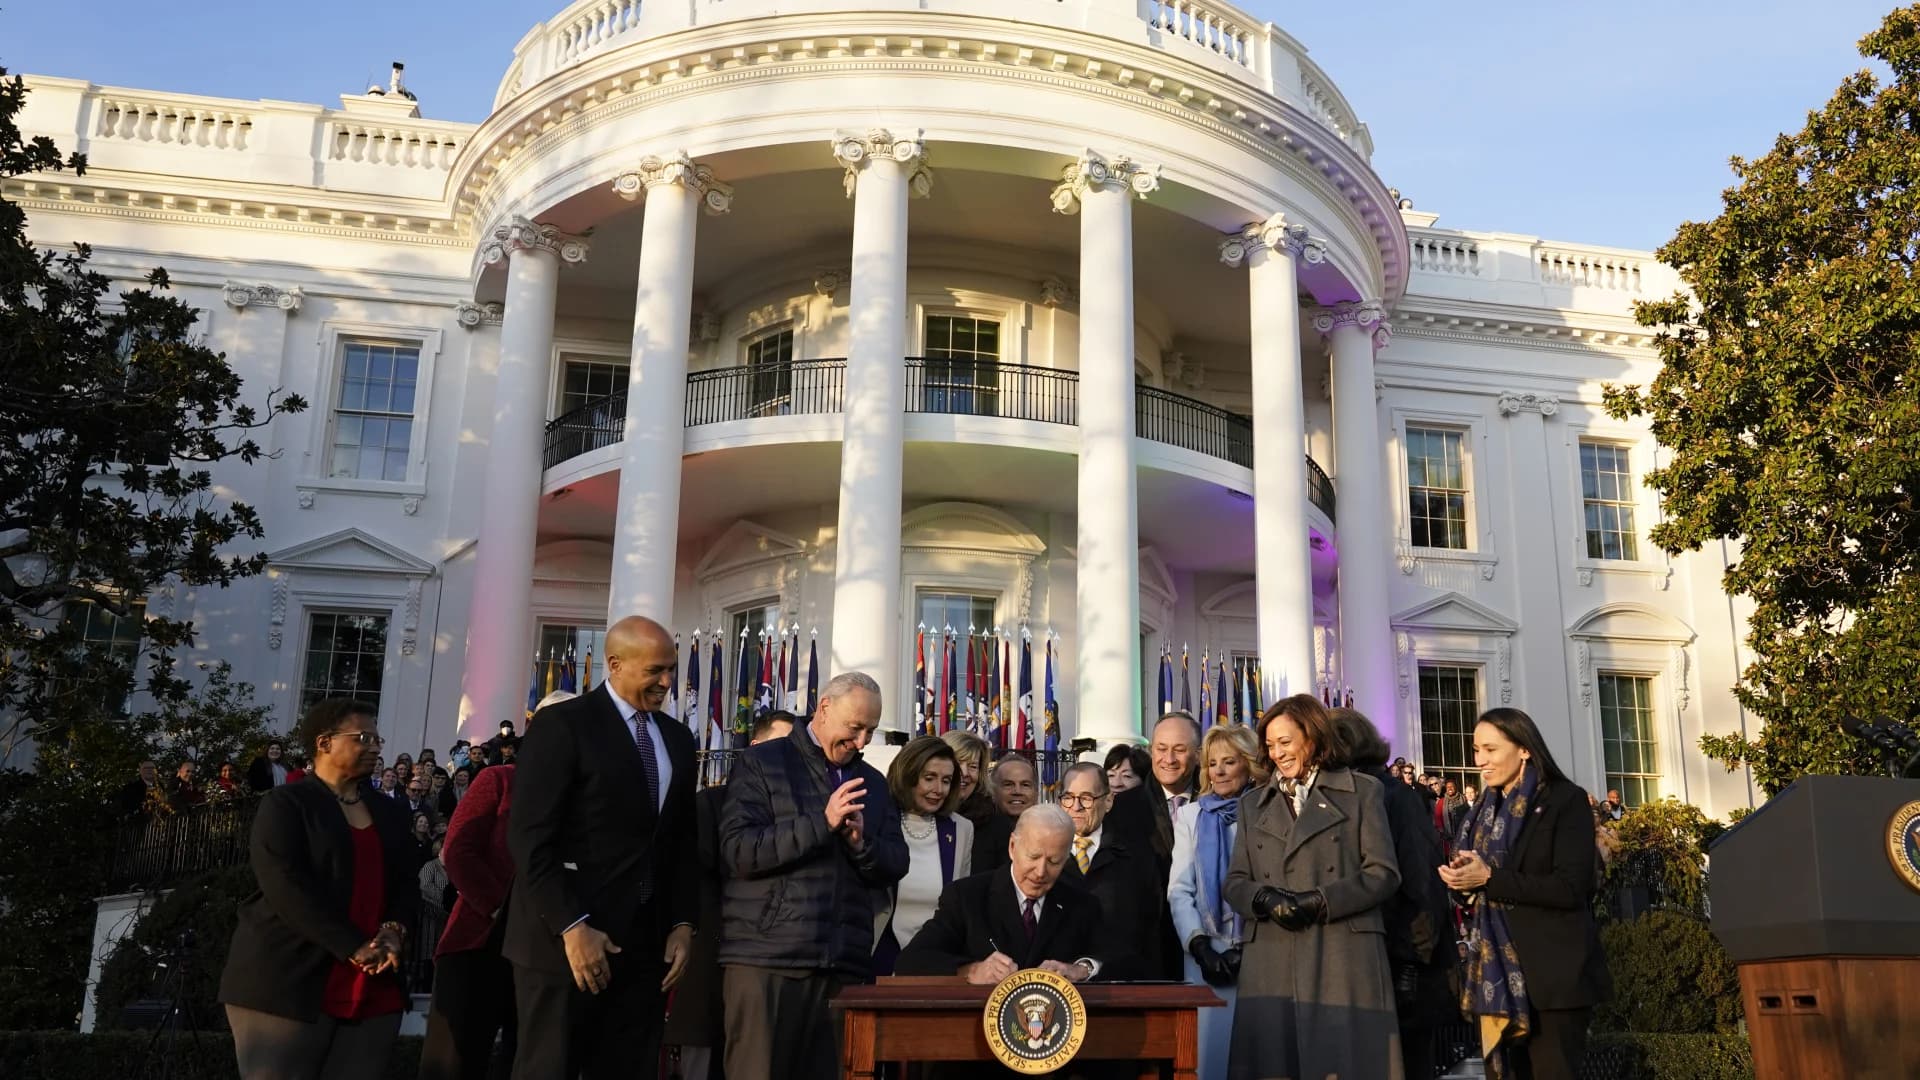 Biden signs gay marriage bill at White House ceremony